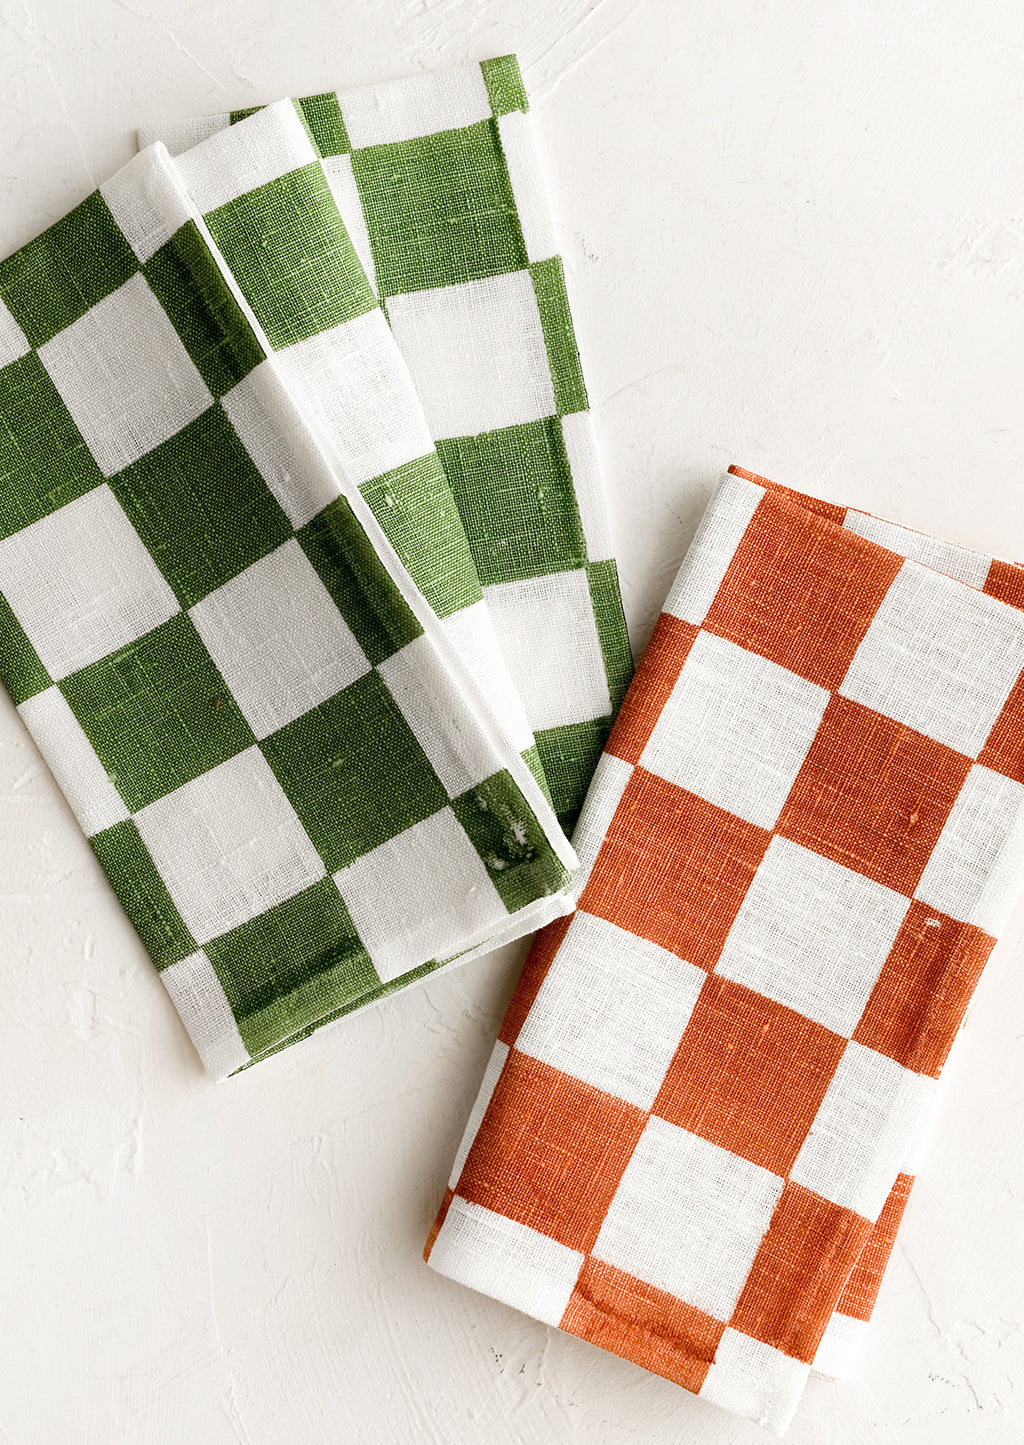 2: Checkered napkins in green and red.